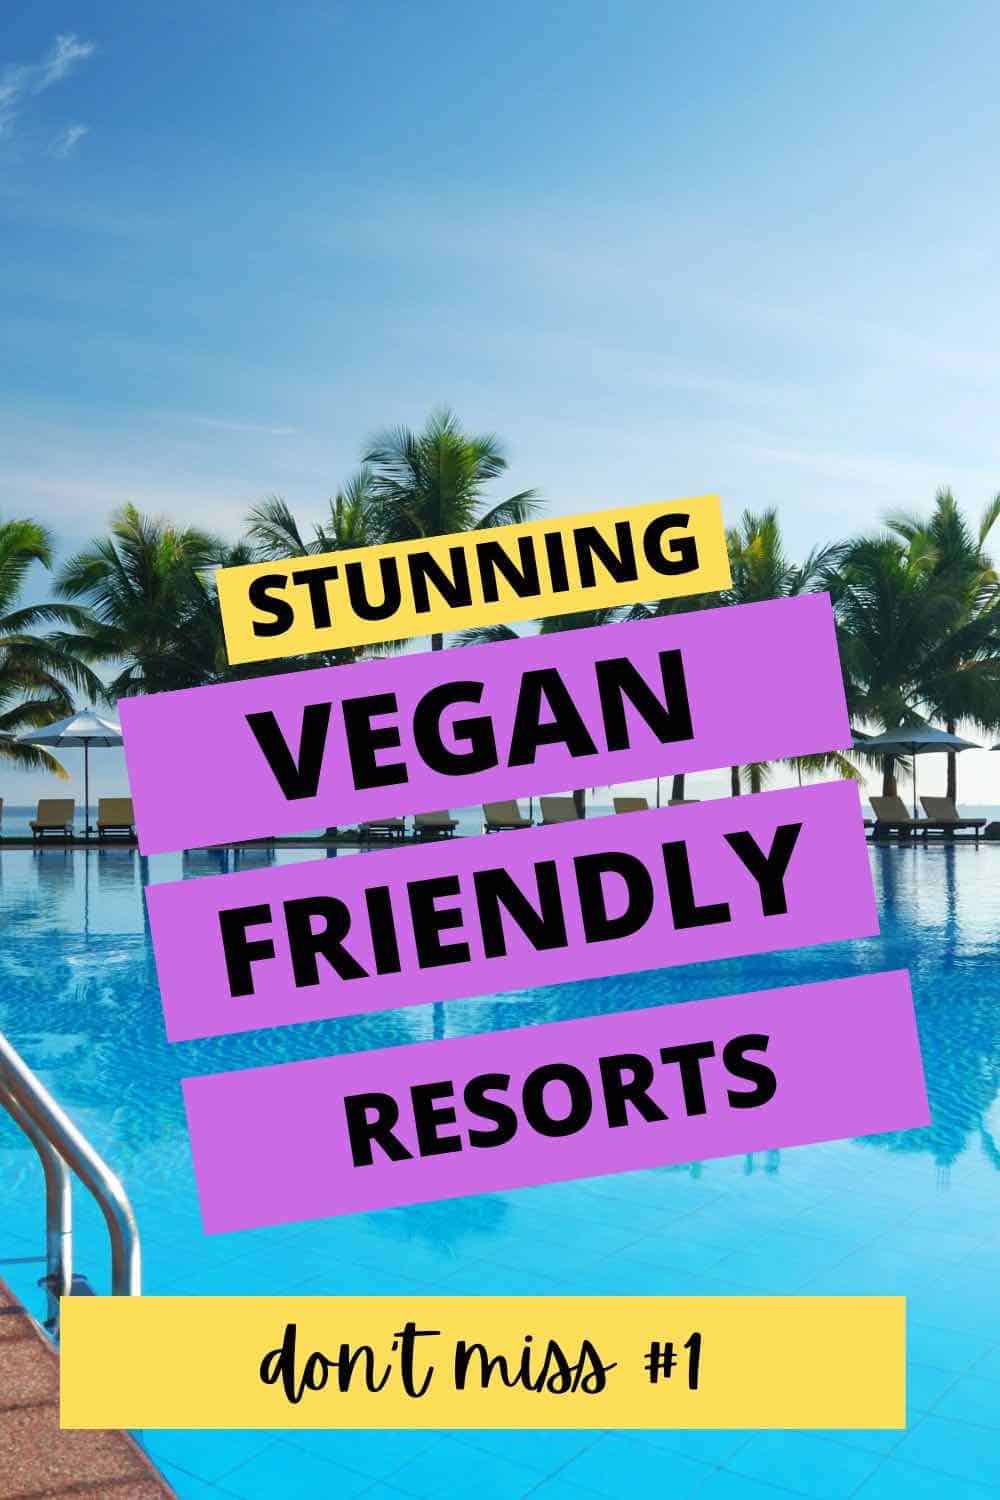 Pinterest image showing pool at a resort surrounded by palm trees with text that needs "stunning vegan friendly resorts: don't miss number 1"